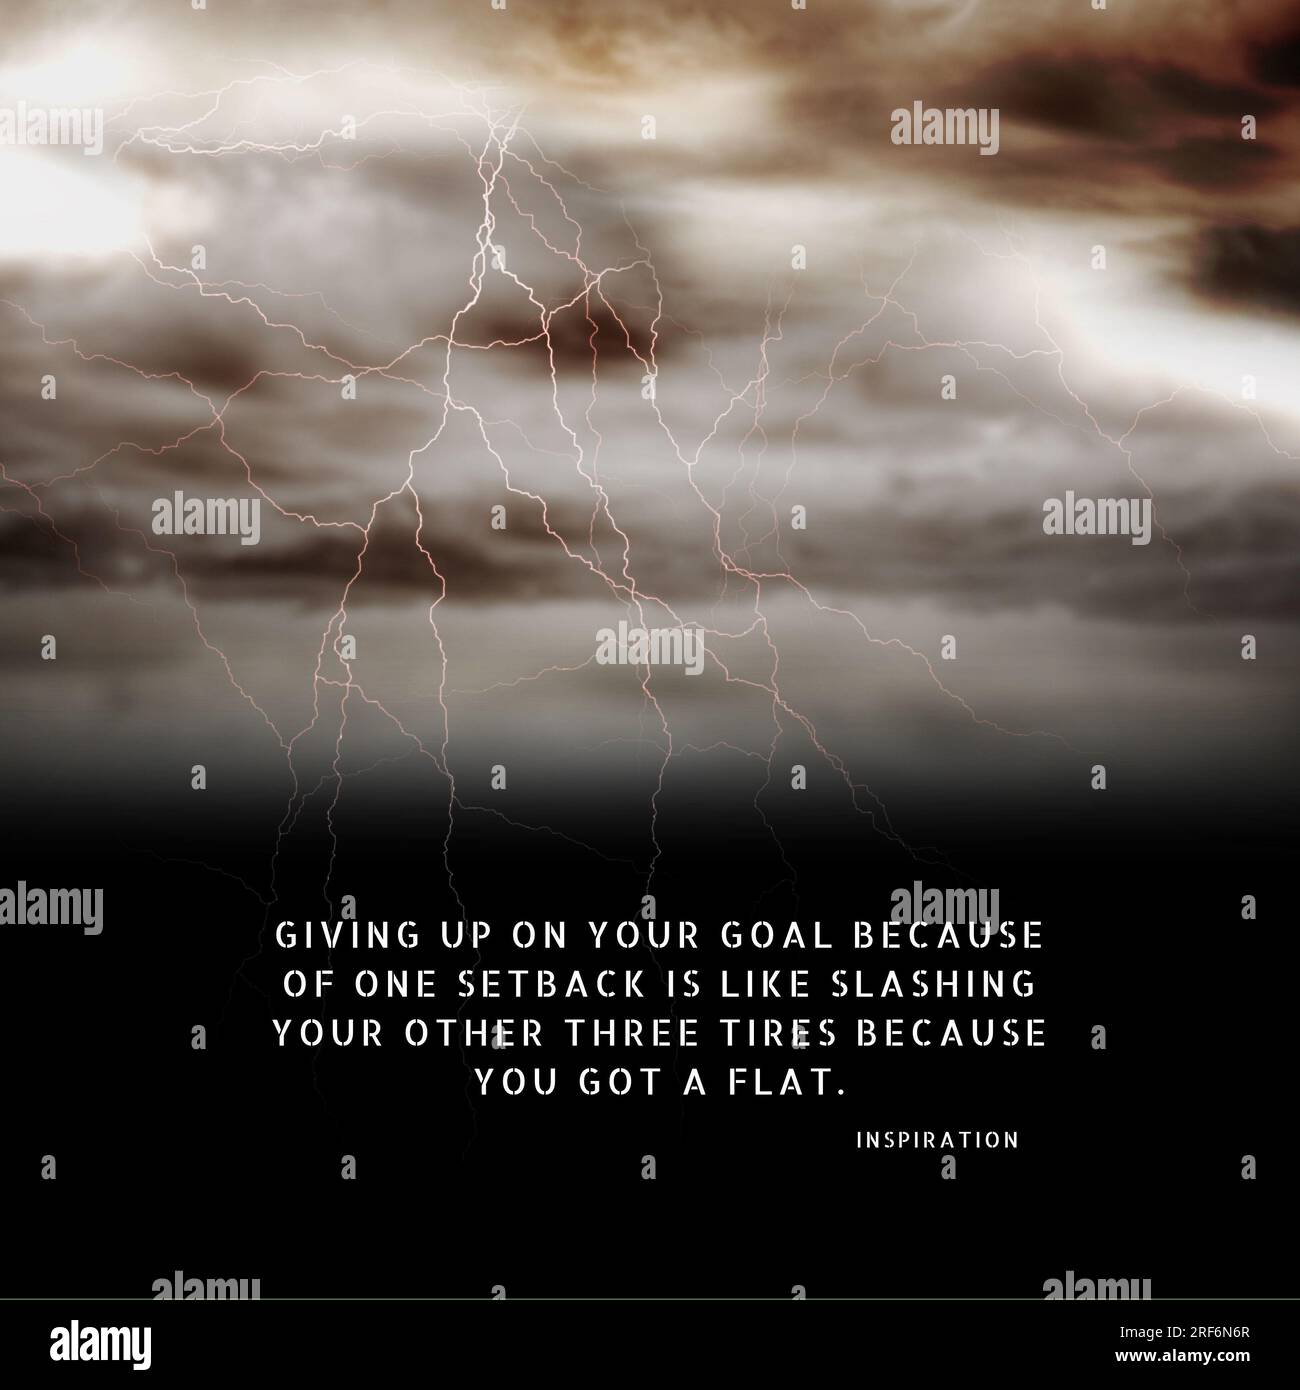 Composition of inspiration quote text over stormy clouds with thunderstorm background Stock Photo